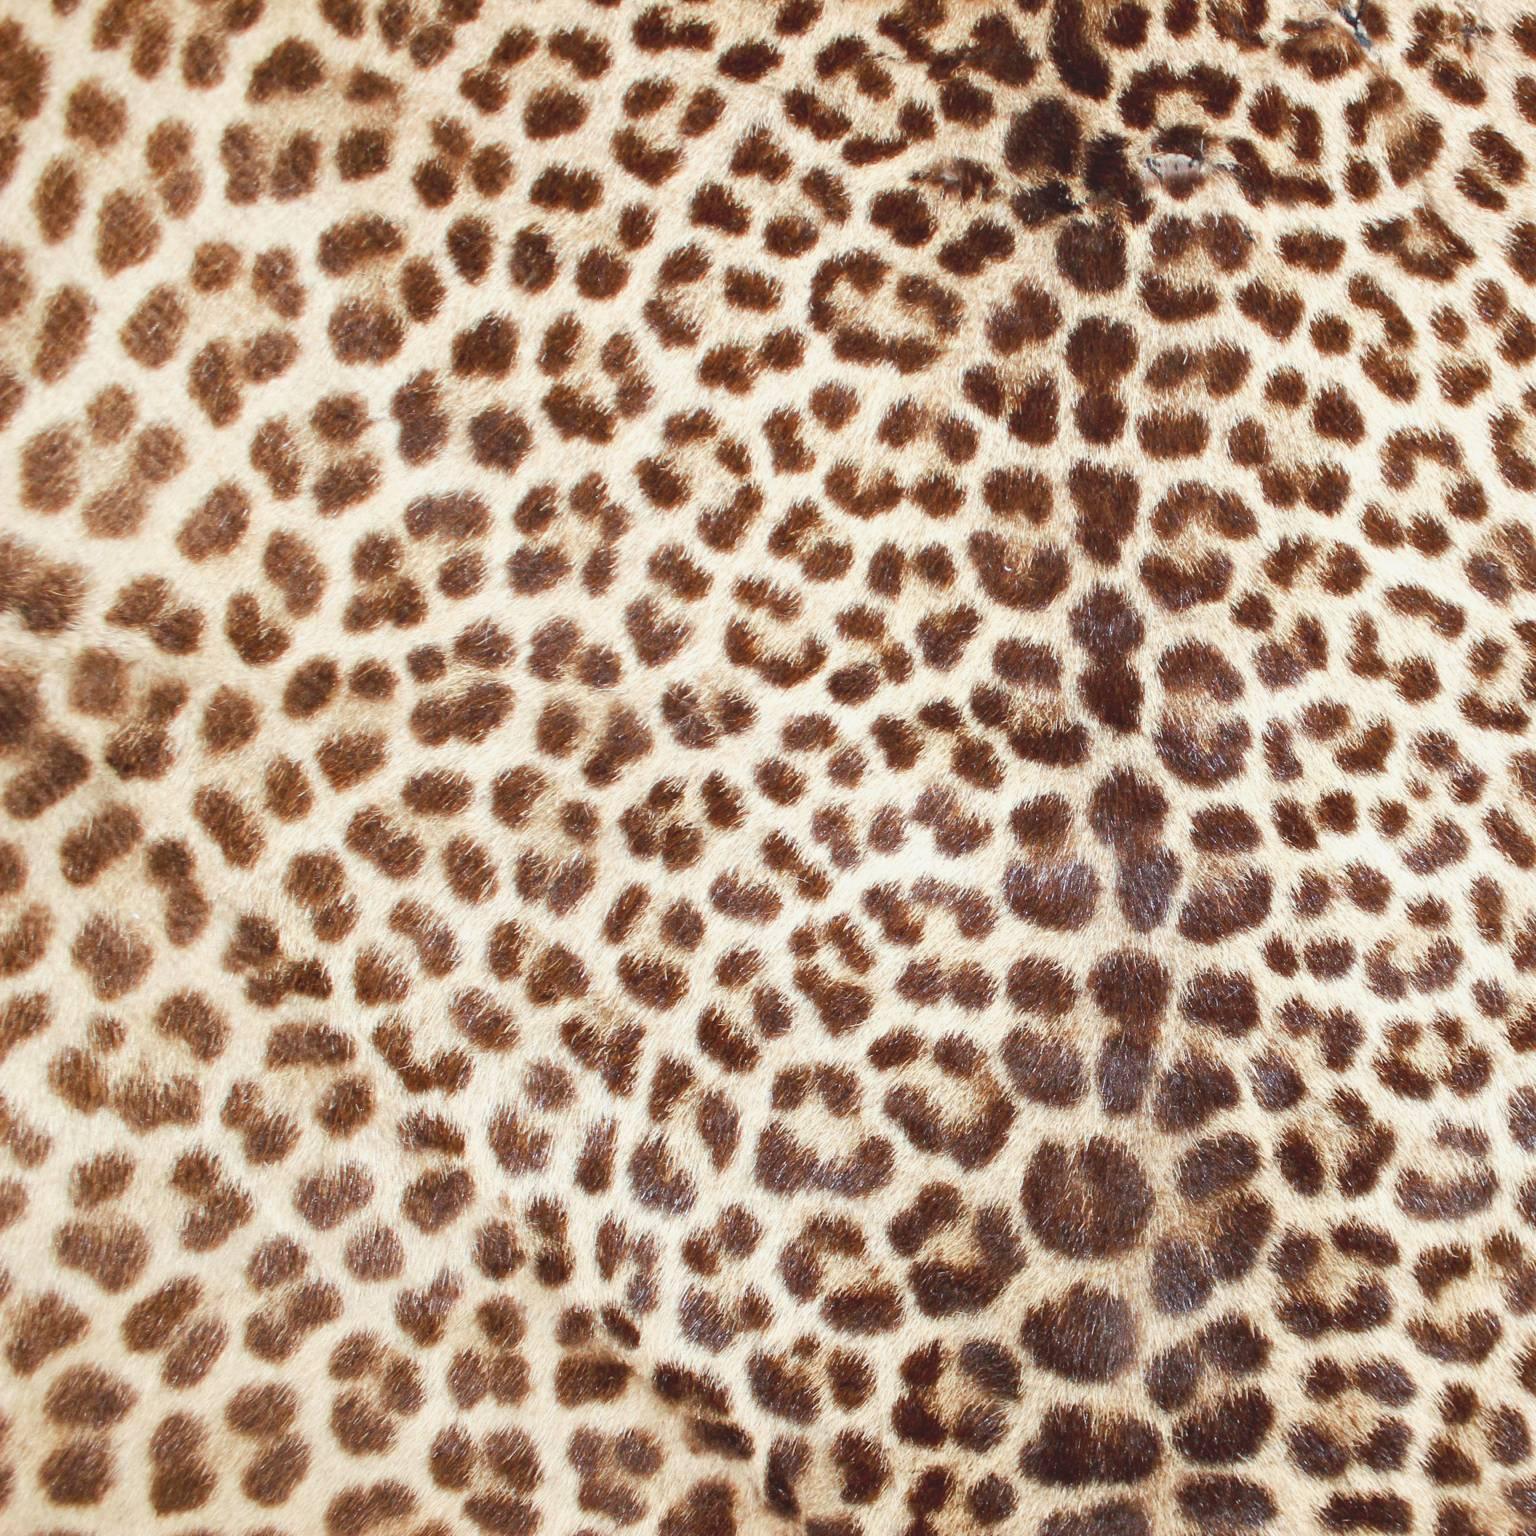 This gorgeous antique leopard skin rug was uncovered on our most recent buying trip, in the French Countryside. Measures approximately 70